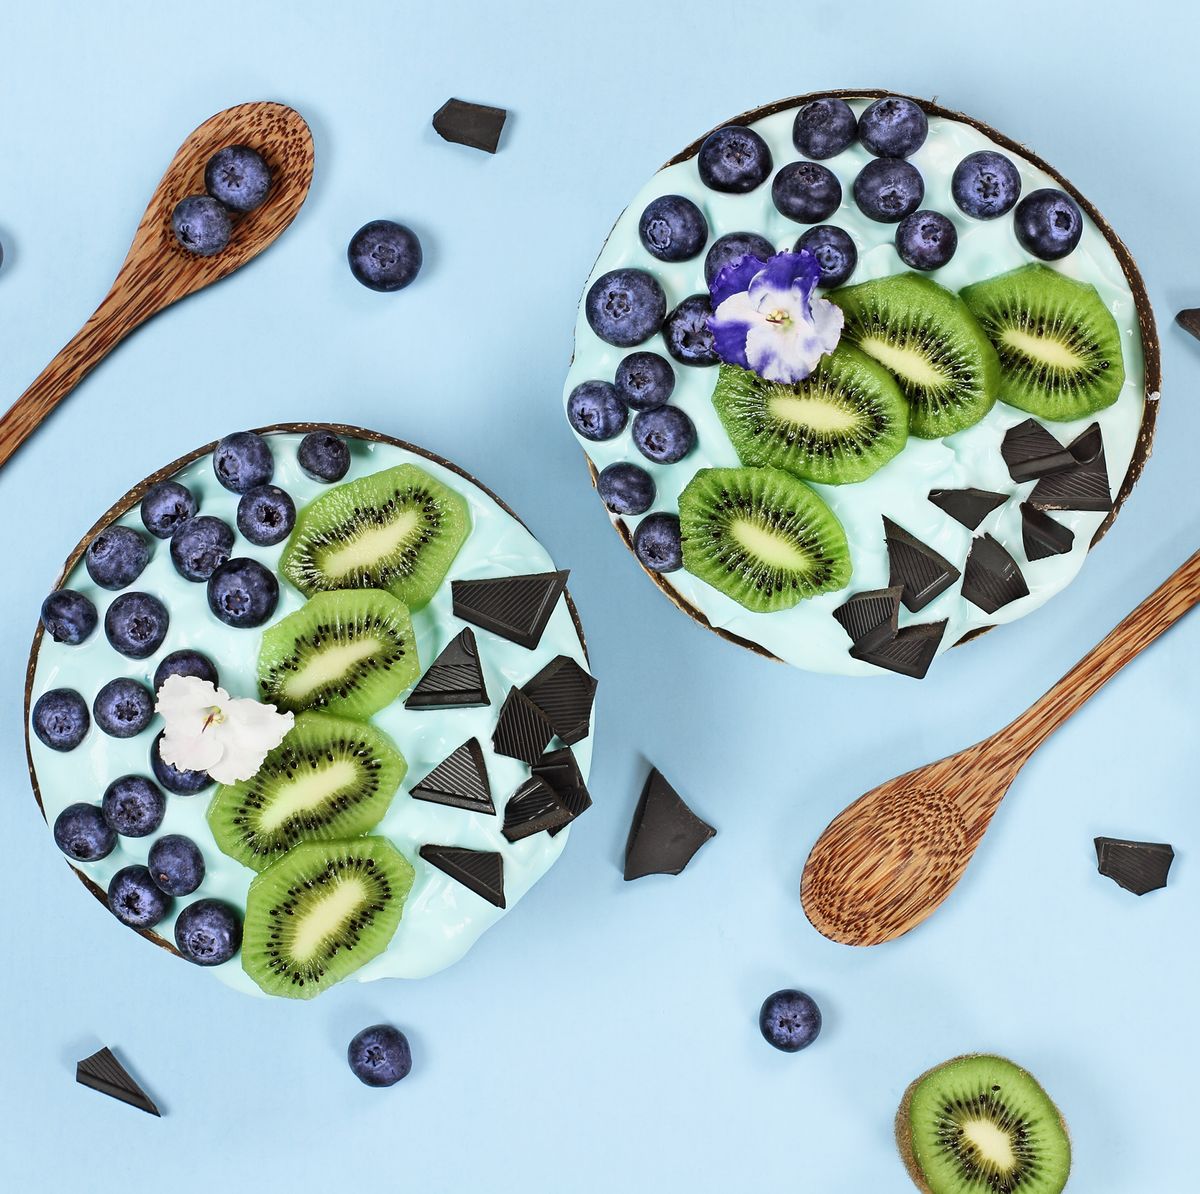 Blue Spirulina and Berry Smoothie Bowl with Blueberries Kiwi and Chocolate